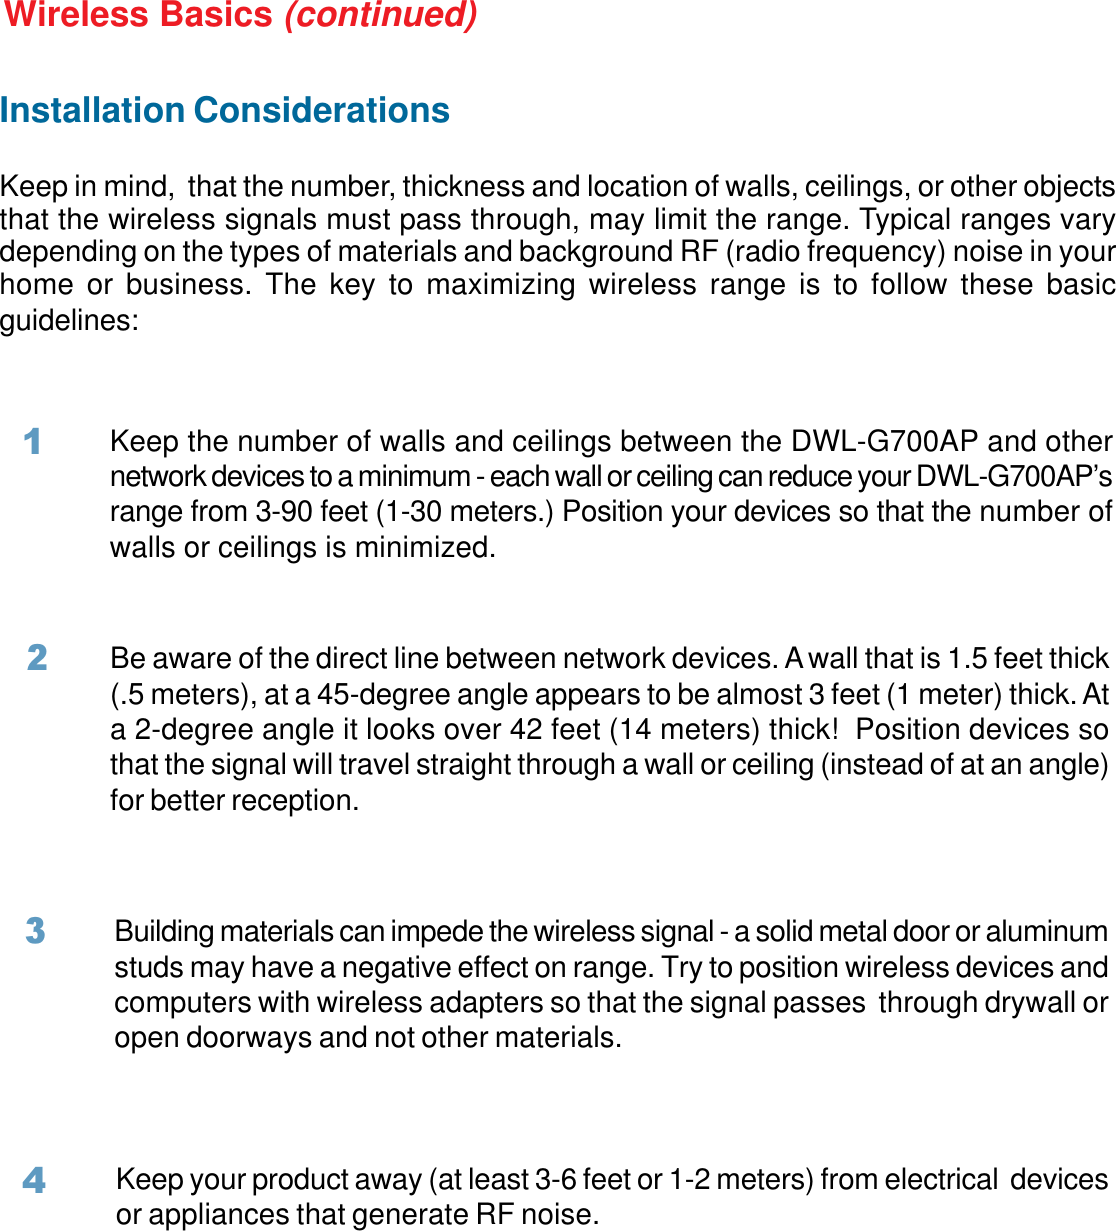 7Installation ConsiderationsKeep in mind,  that the number, thickness and location of walls, ceilings, or other objectsthat the wireless signals must pass through, may limit the range. Typical ranges varydepending on the types of materials and background RF (radio frequency) noise in yourhome or business. The key to maximizing wireless range is to follow these basicguidelines:Wireless Basics (continued)Keep the number of walls and ceilings between the DWL-G700AP and othernetwork devices to a minimum - each wall or ceiling can reduce your DWL-G700AP’srange from 3-90 feet (1-30 meters.) Position your devices so that the number ofwalls or ceilings is minimized.Be aware of the direct line between network devices. A wall that is 1.5 feet thick(.5 meters), at a 45-degree angle appears to be almost 3 feet (1 meter) thick. Ata 2-degree angle it looks over 42 feet (14 meters) thick!  Position devices sothat the signal will travel straight through a wall or ceiling (instead of at an angle)for better reception.2Building materials can impede the wireless signal - a solid metal door or aluminumstuds may have a negative effect on range. Try to position wireless devices andcomputers with wireless adapters so that the signal passes  through drywall oropen doorways and not other materials.3Keep your product away (at least 3-6 feet or 1-2 meters) from electrical  devicesor appliances that generate RF noise.41